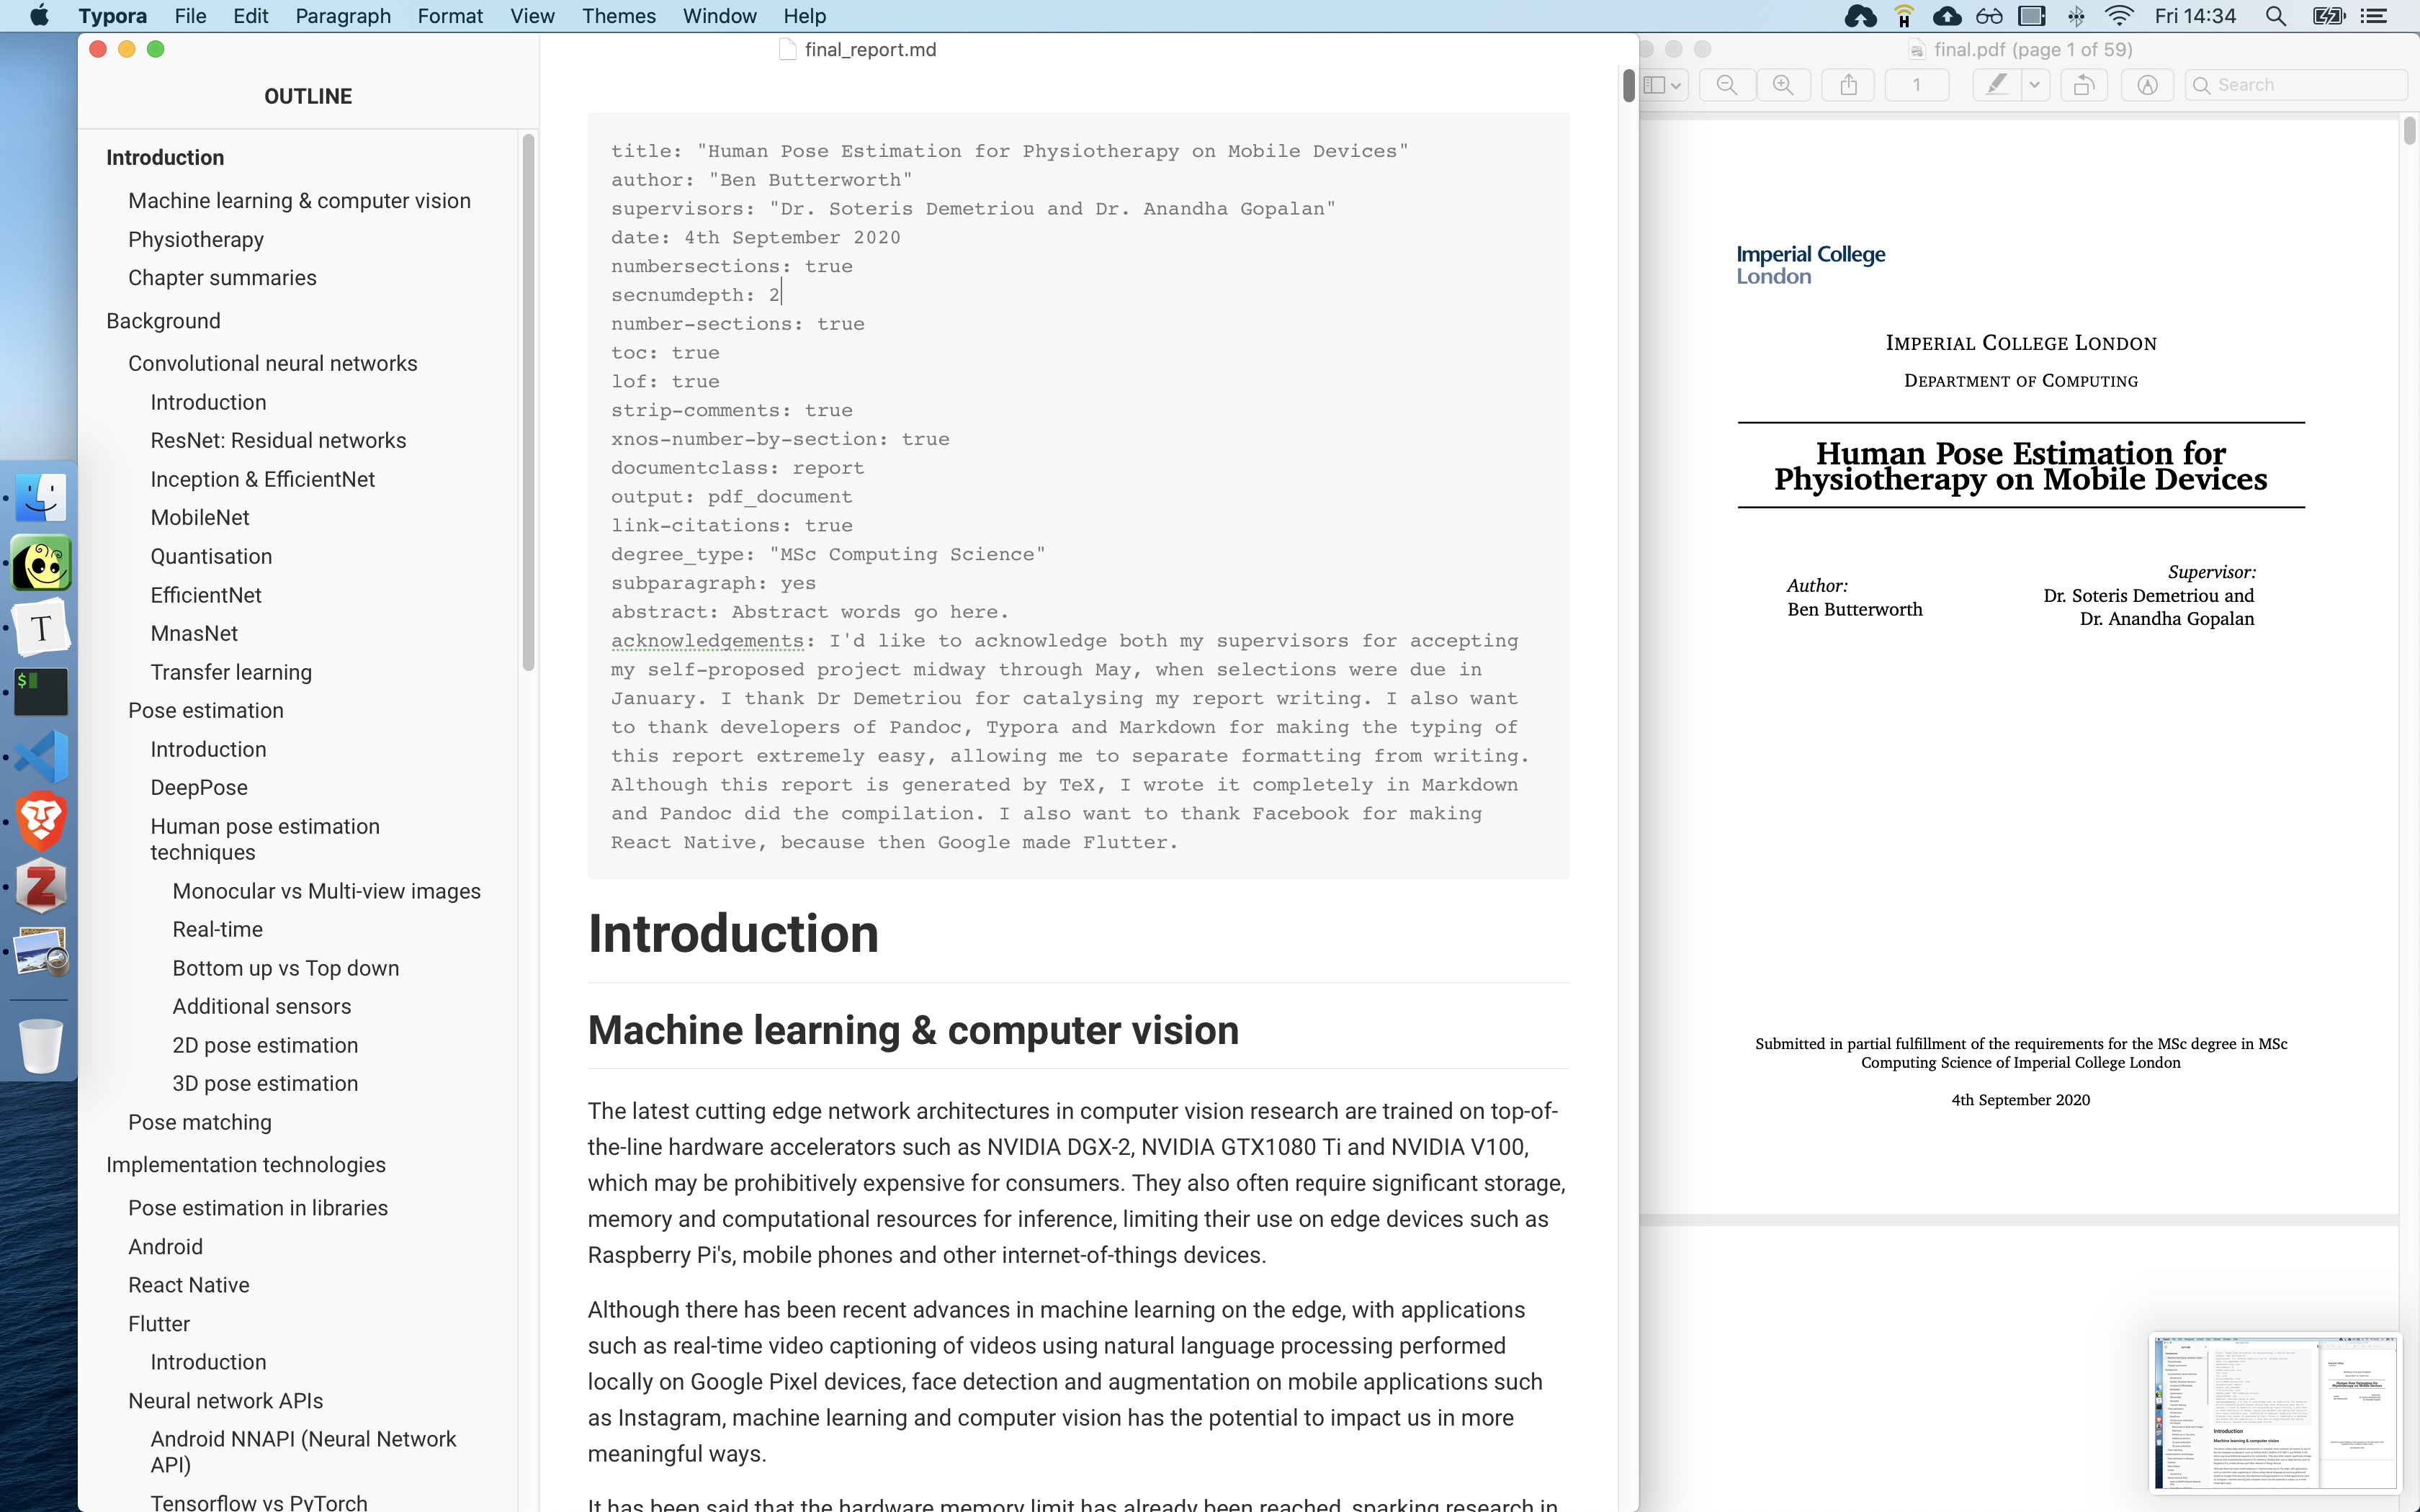 My text editor on the left, and the generated PDF on the right